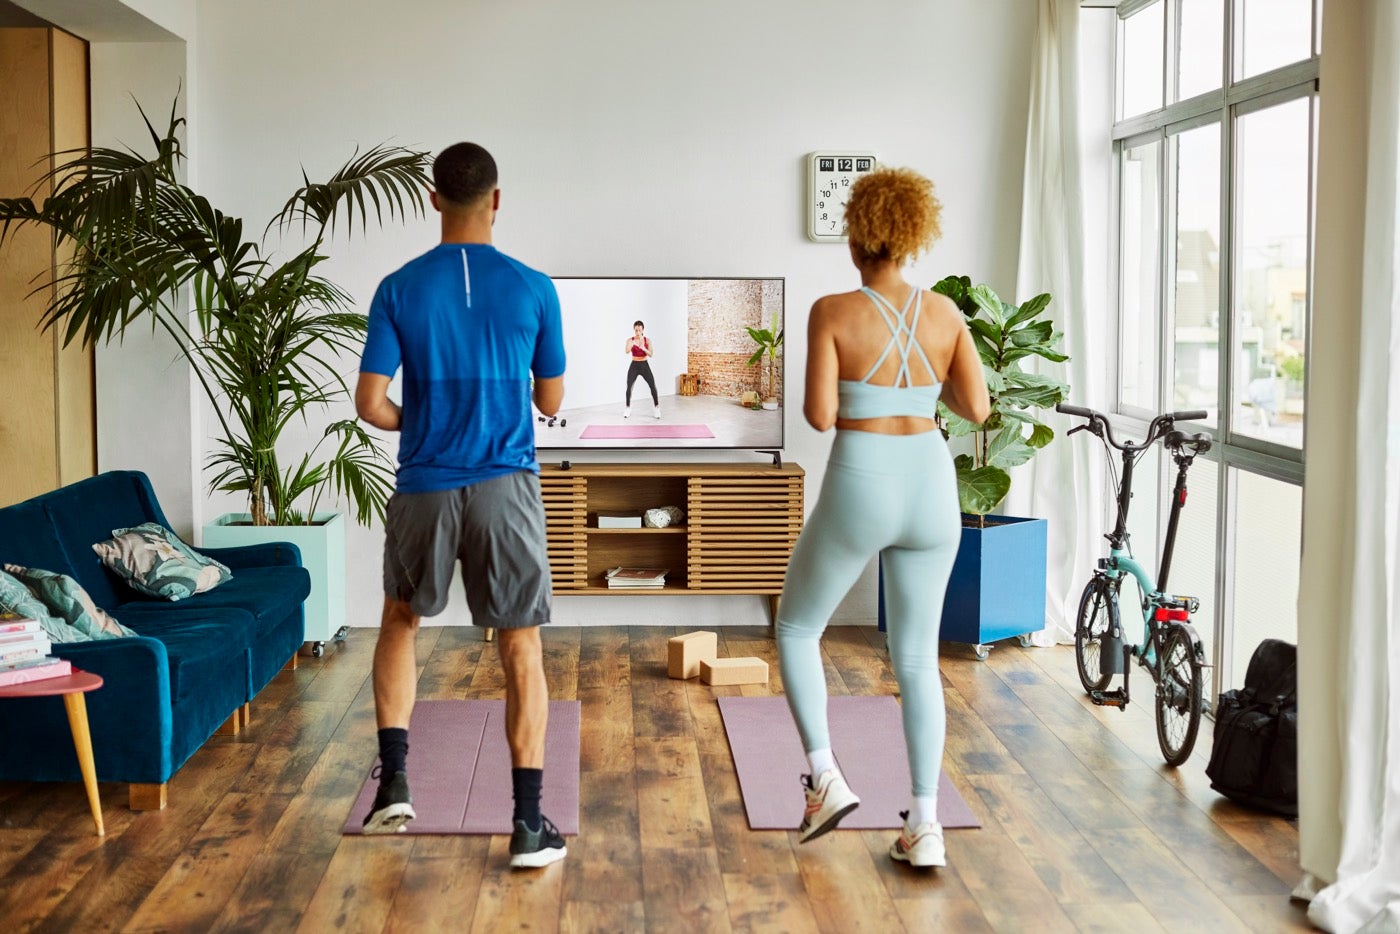 Prime Day Deals: Fitness, Sleep, Tech, Home and Sports